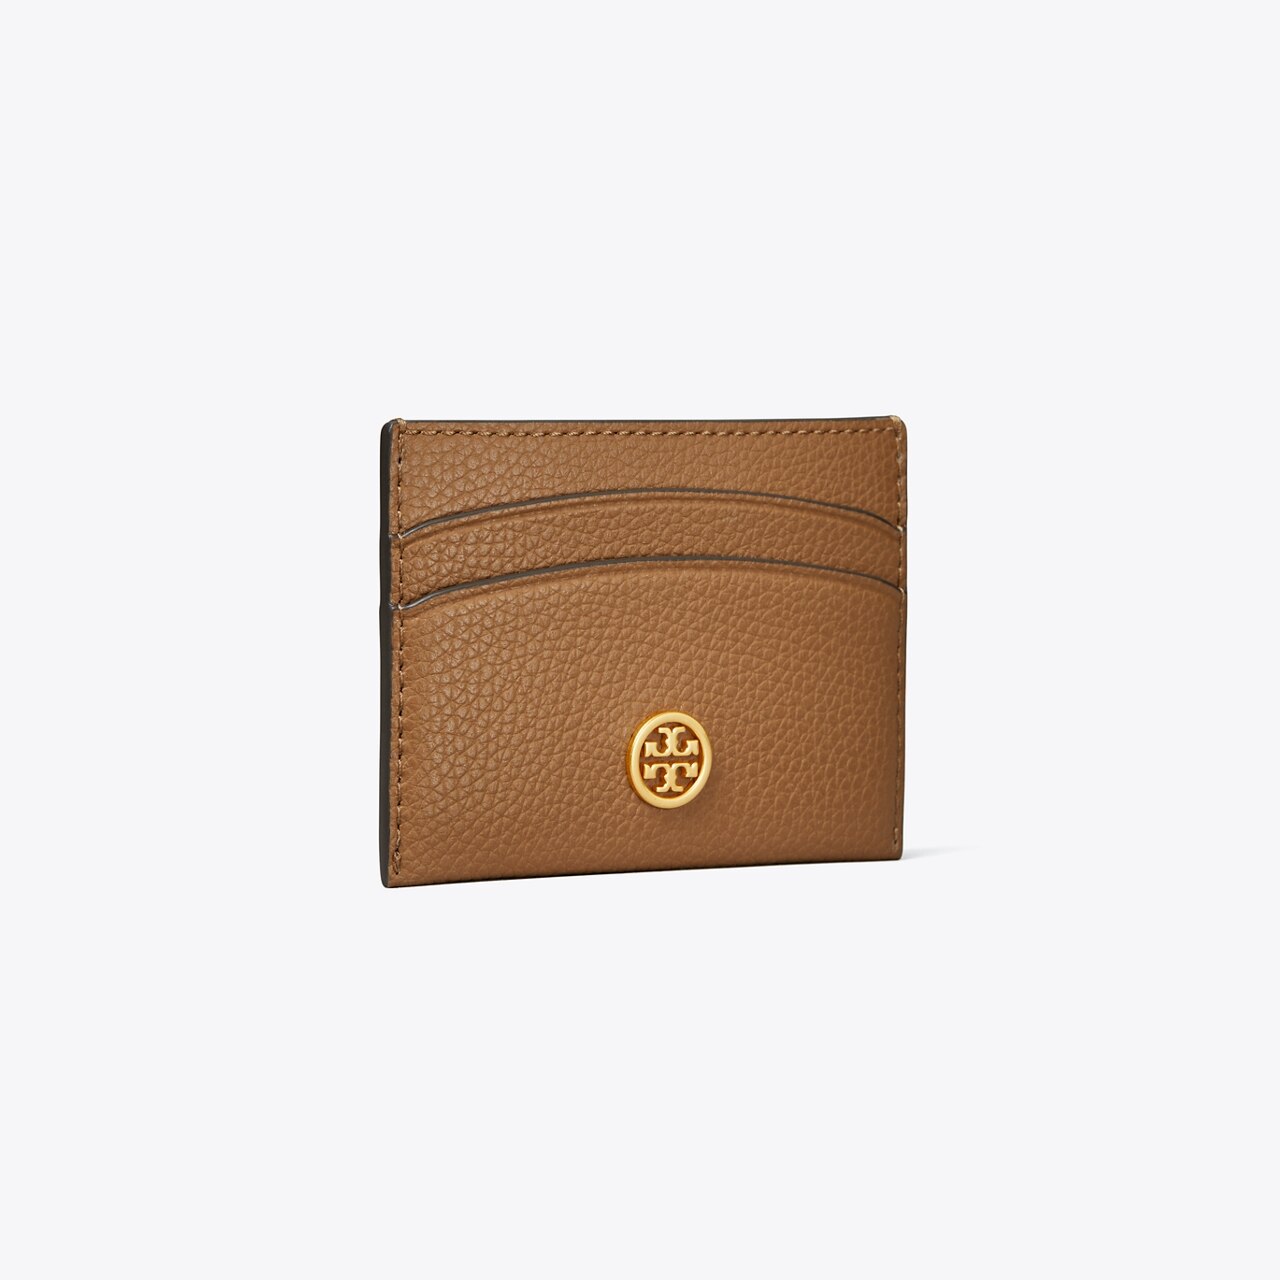 Robinson Pebbled Card Case: Women's Wallets & Card Cases | Card